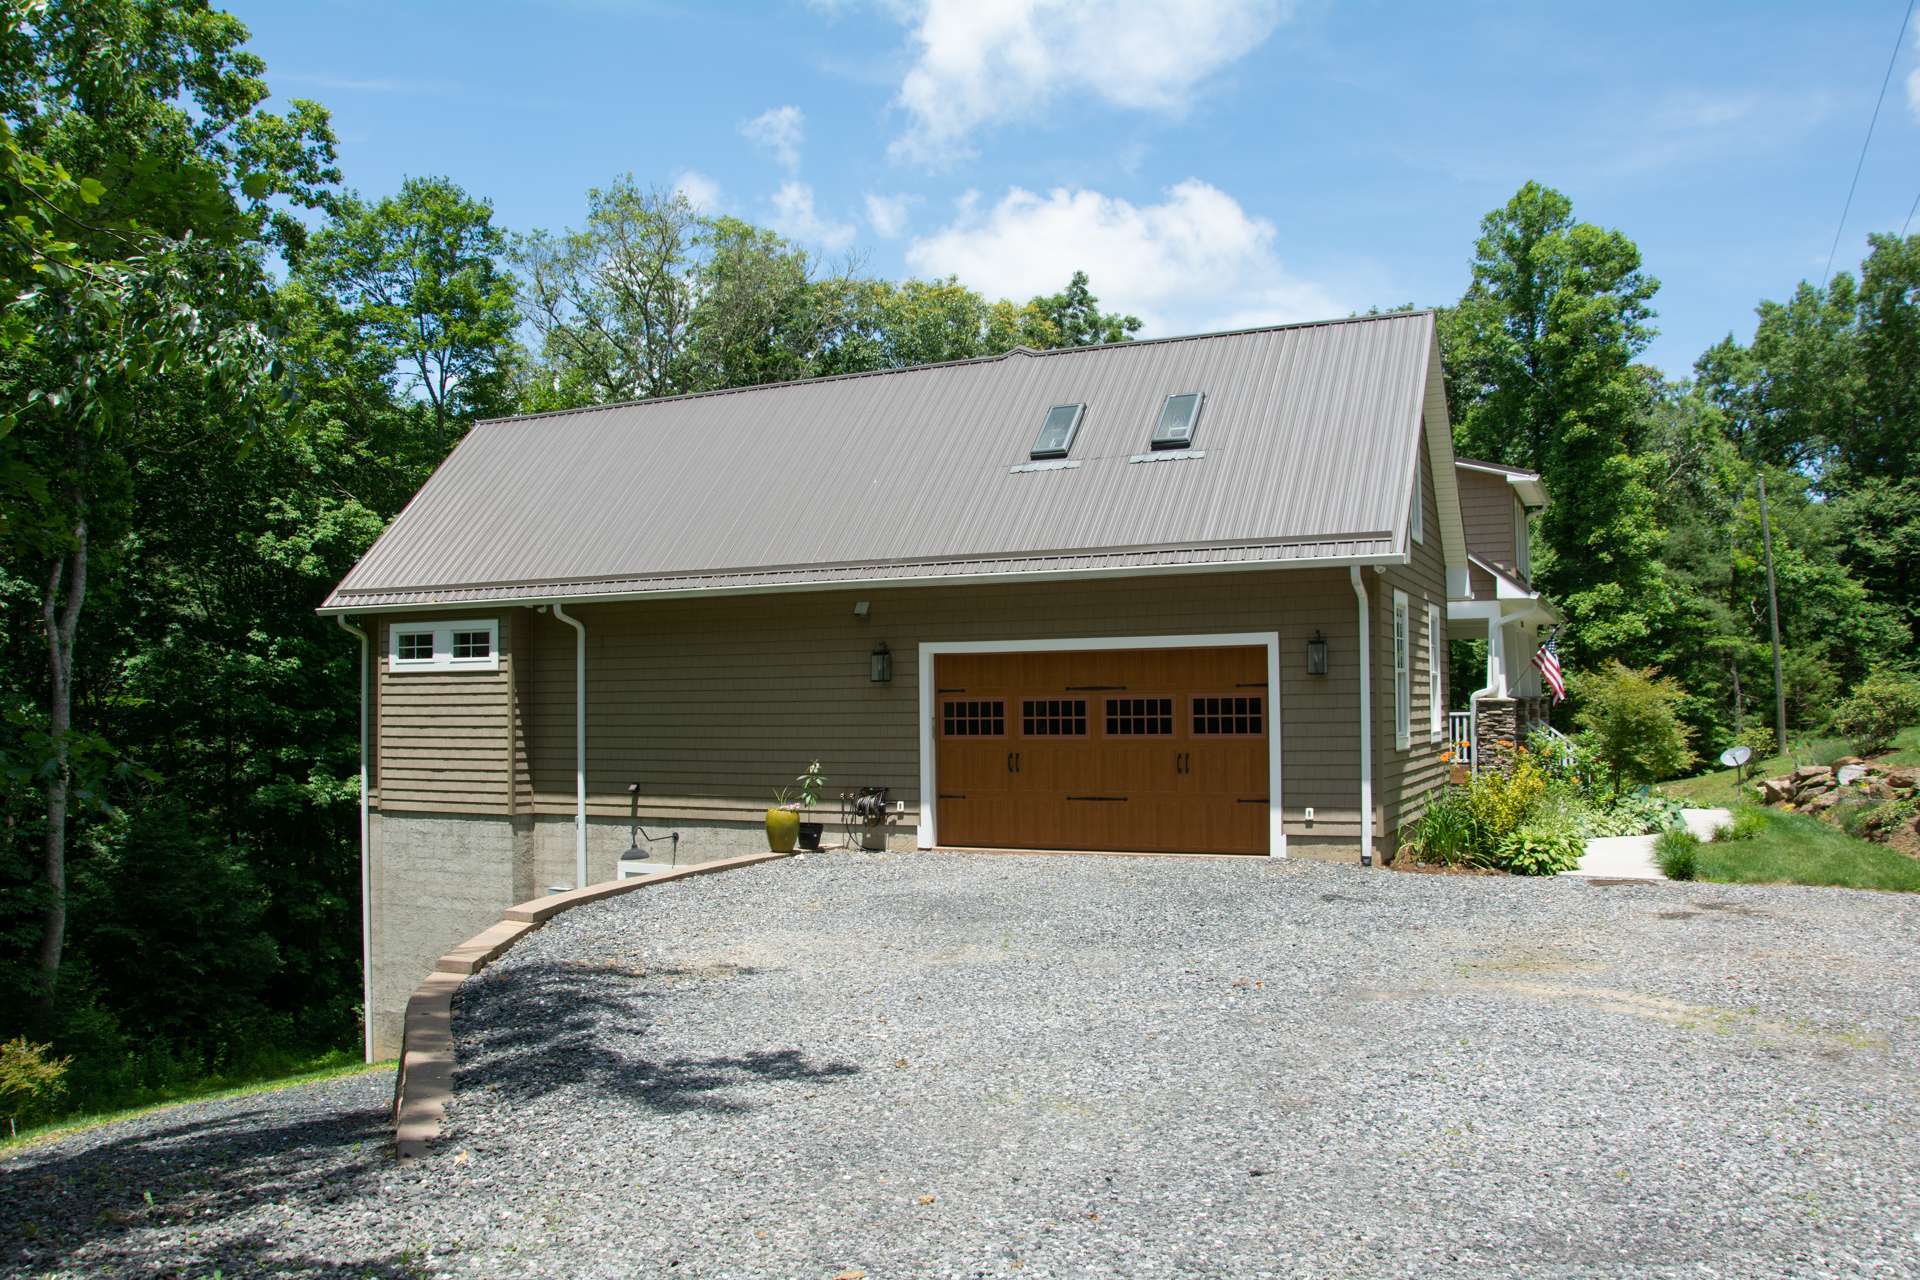 You will appreciate the attached garage for car storage, workshop, or other storage space.